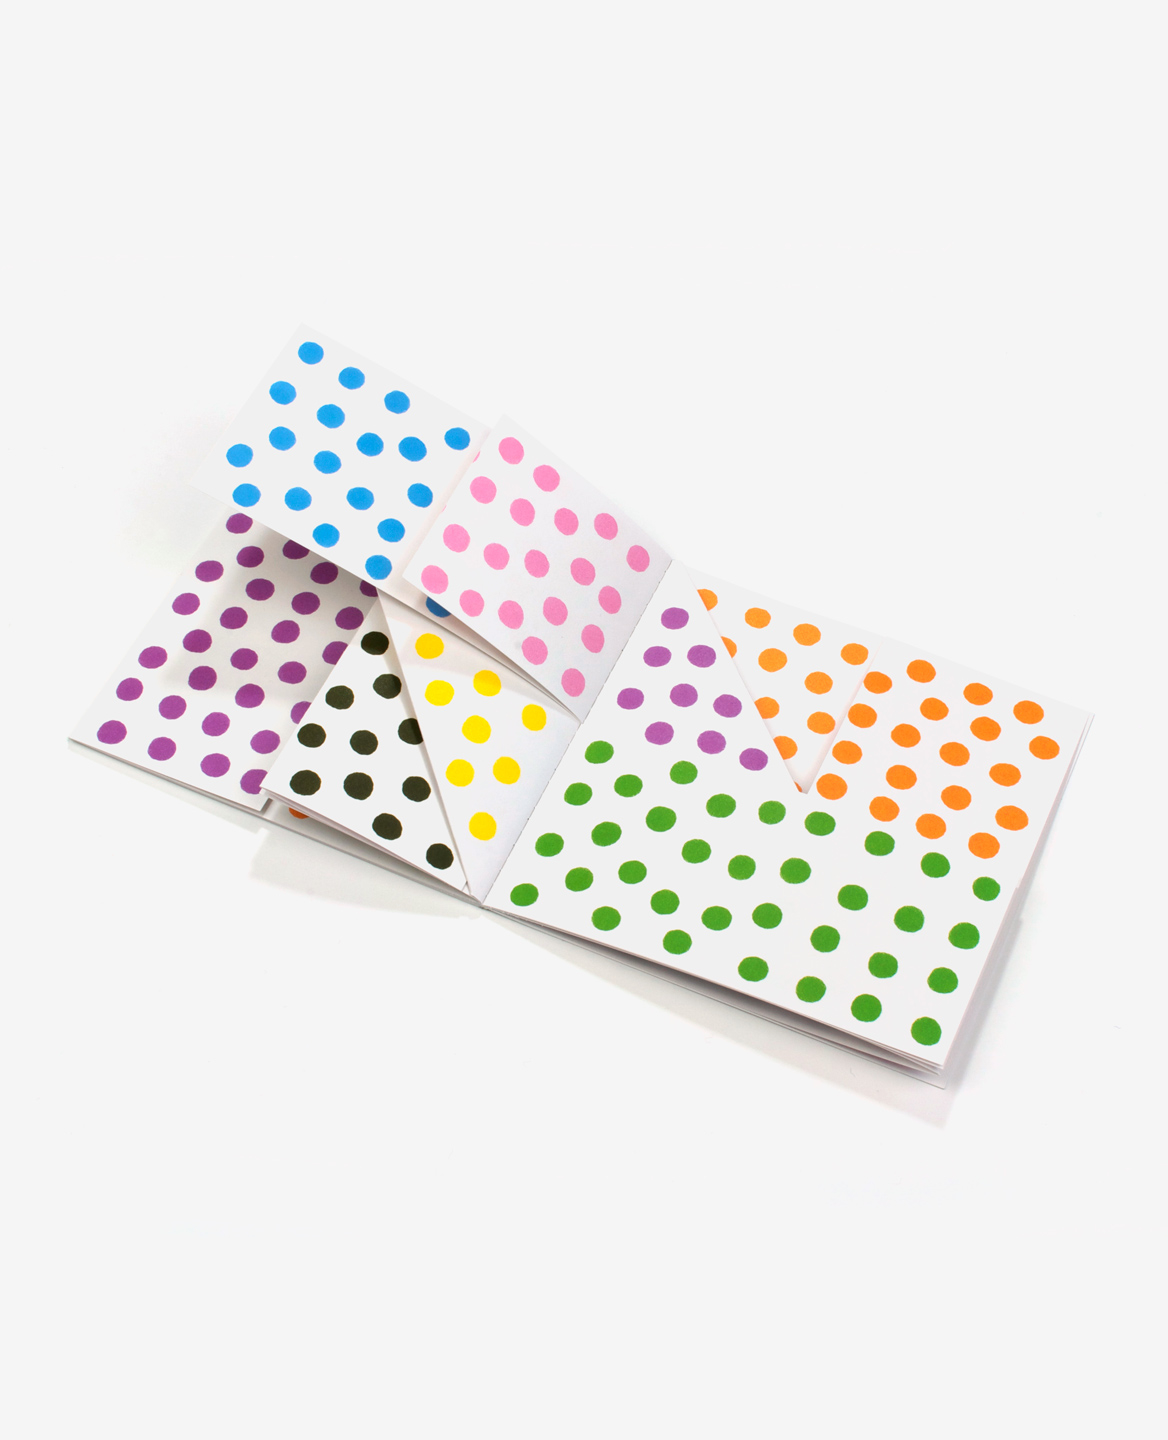 General view of the book Dots by Antonio Ladrillo published by Éditions du livre